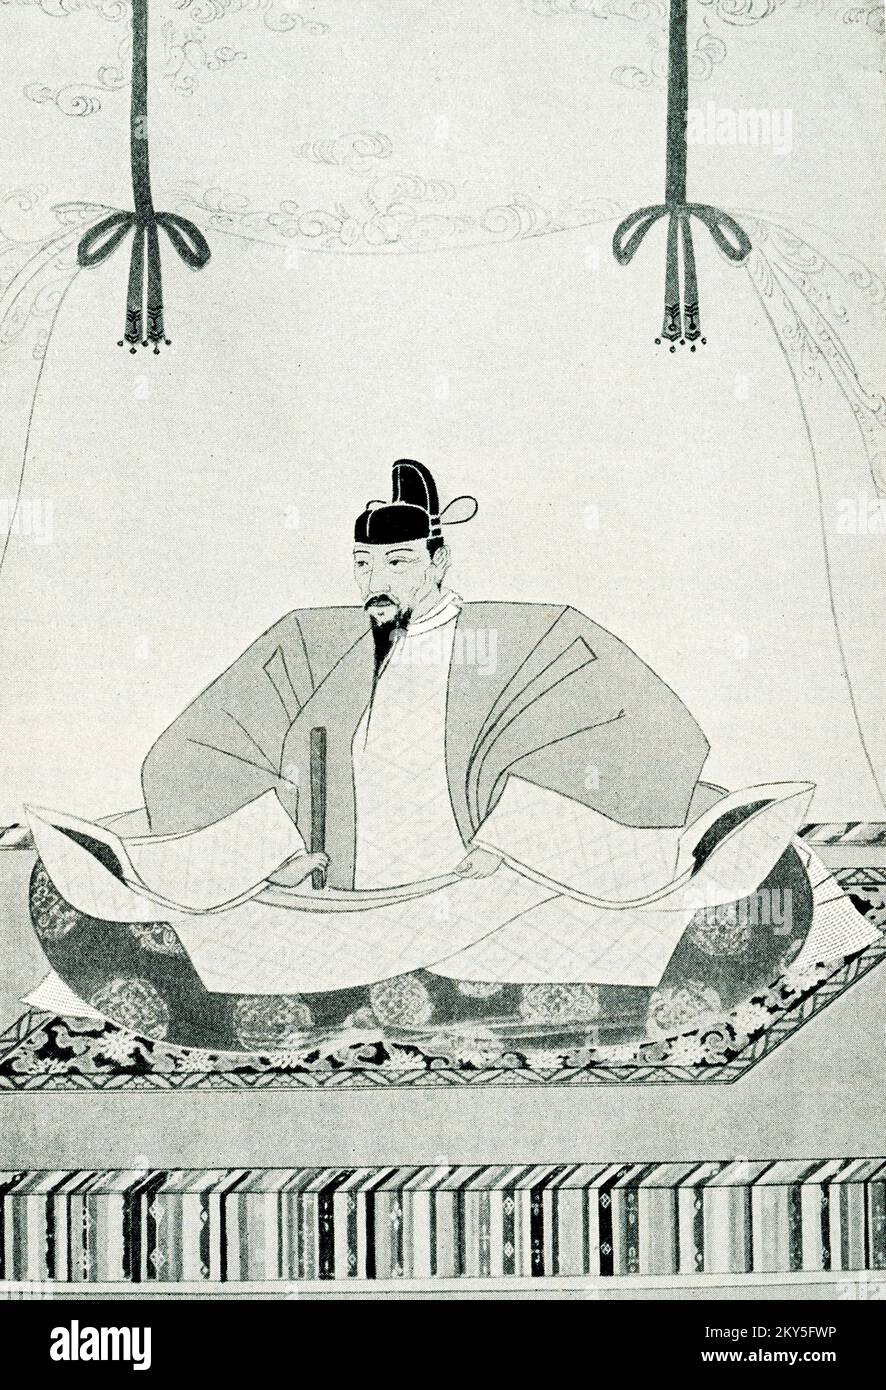 This image shows: 'A portrait of Hideyoshi  Painted the year 1600. Original in the Temple Kodaiji in Kyoto.' Hideyoshi was a Japanese samurai. Toyotomi Hideyoshi (1537-1598 AD) was a Japanese military leader who, along with his predecessor Oda Nobunaga and his successor Tokugawa Ieyasu, is credited with unifying Japan in the 16th century AD. Stock Photo